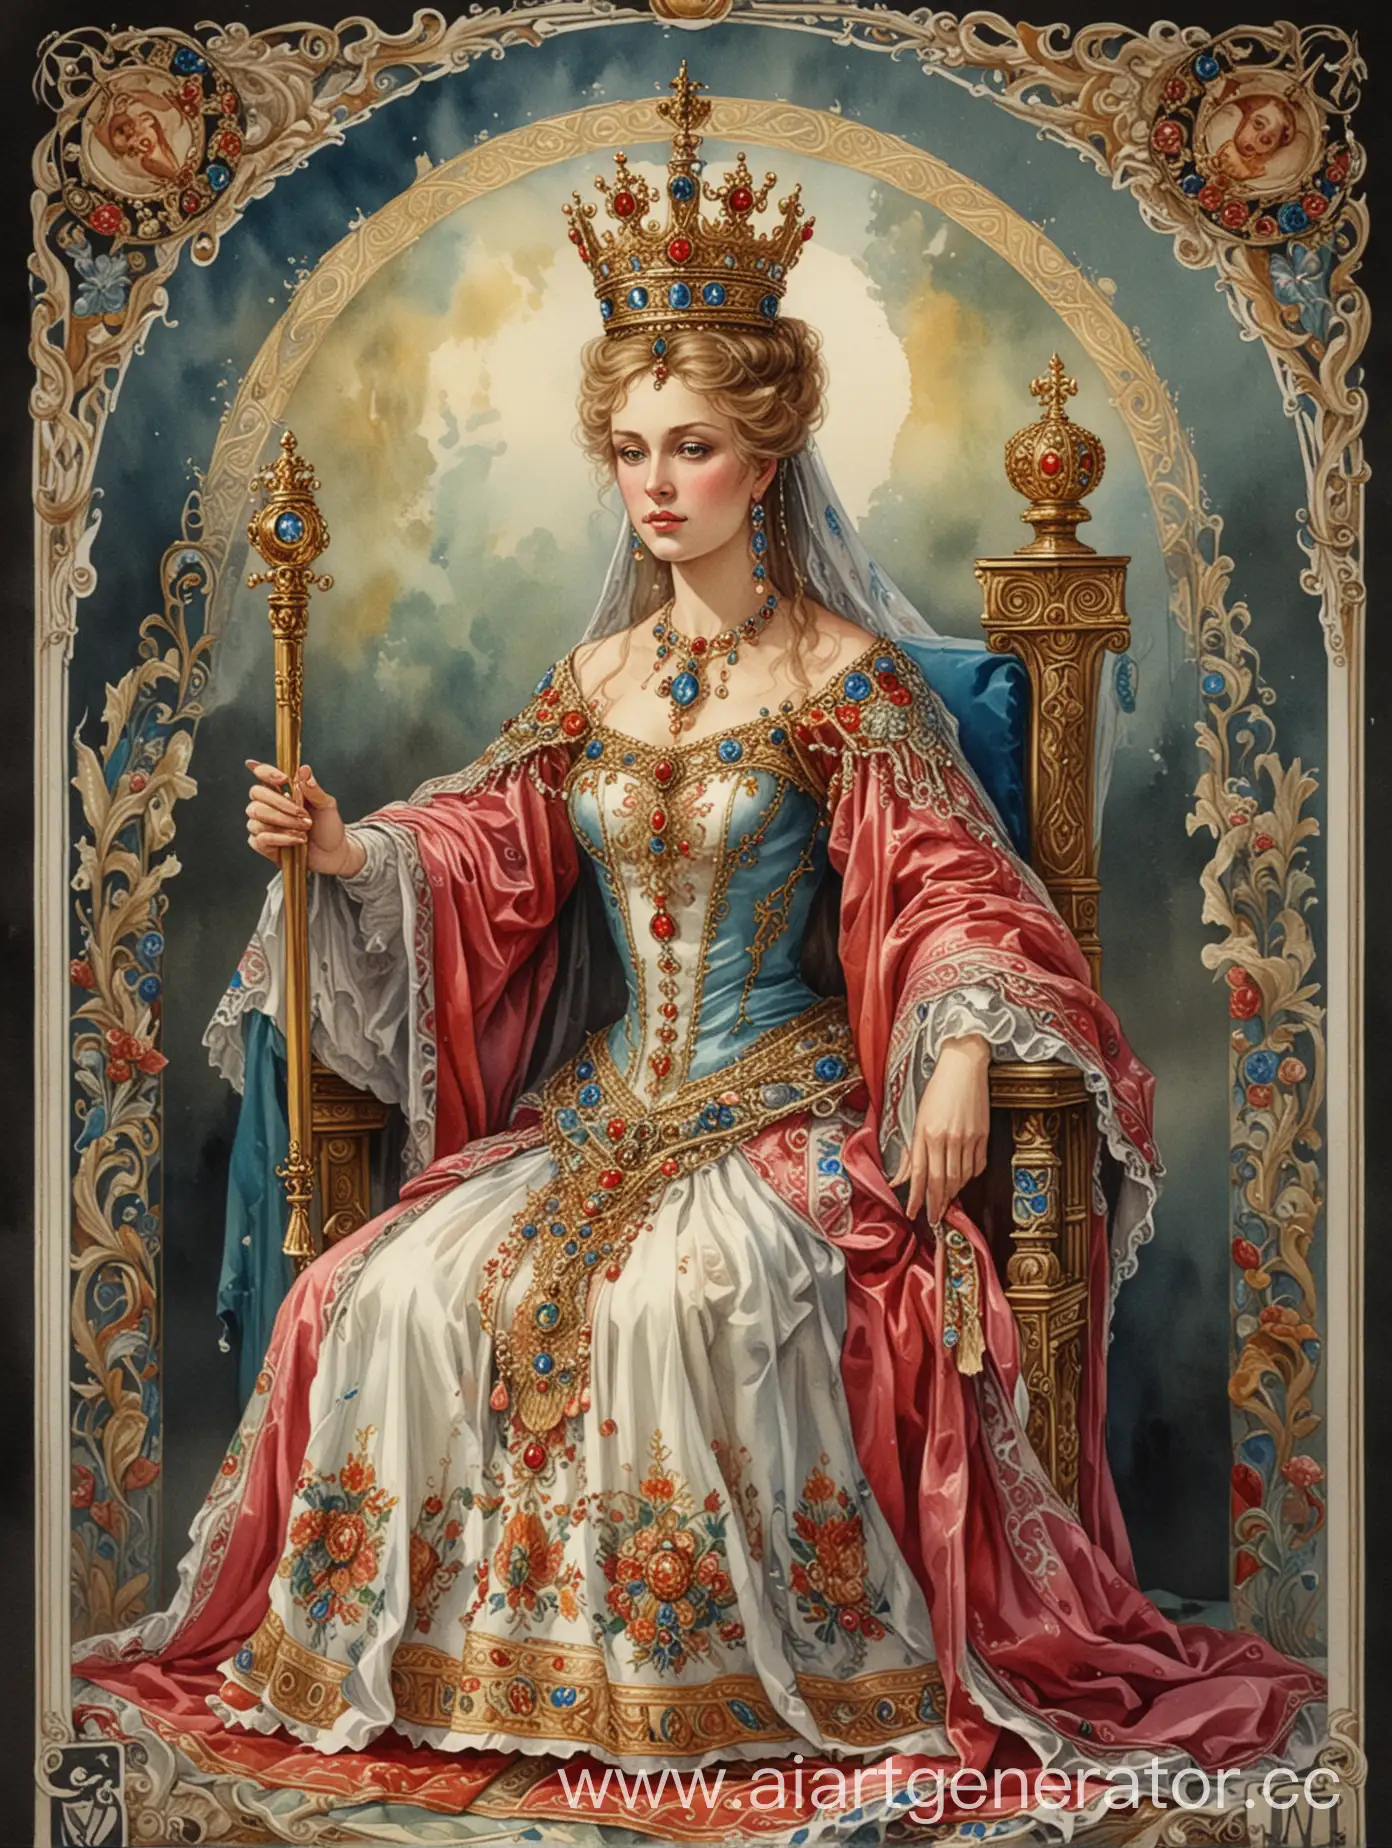 Empress-Tarot-Card-Majestic-Russian-Beauty-on-Throne-with-Scepter-and-Orb